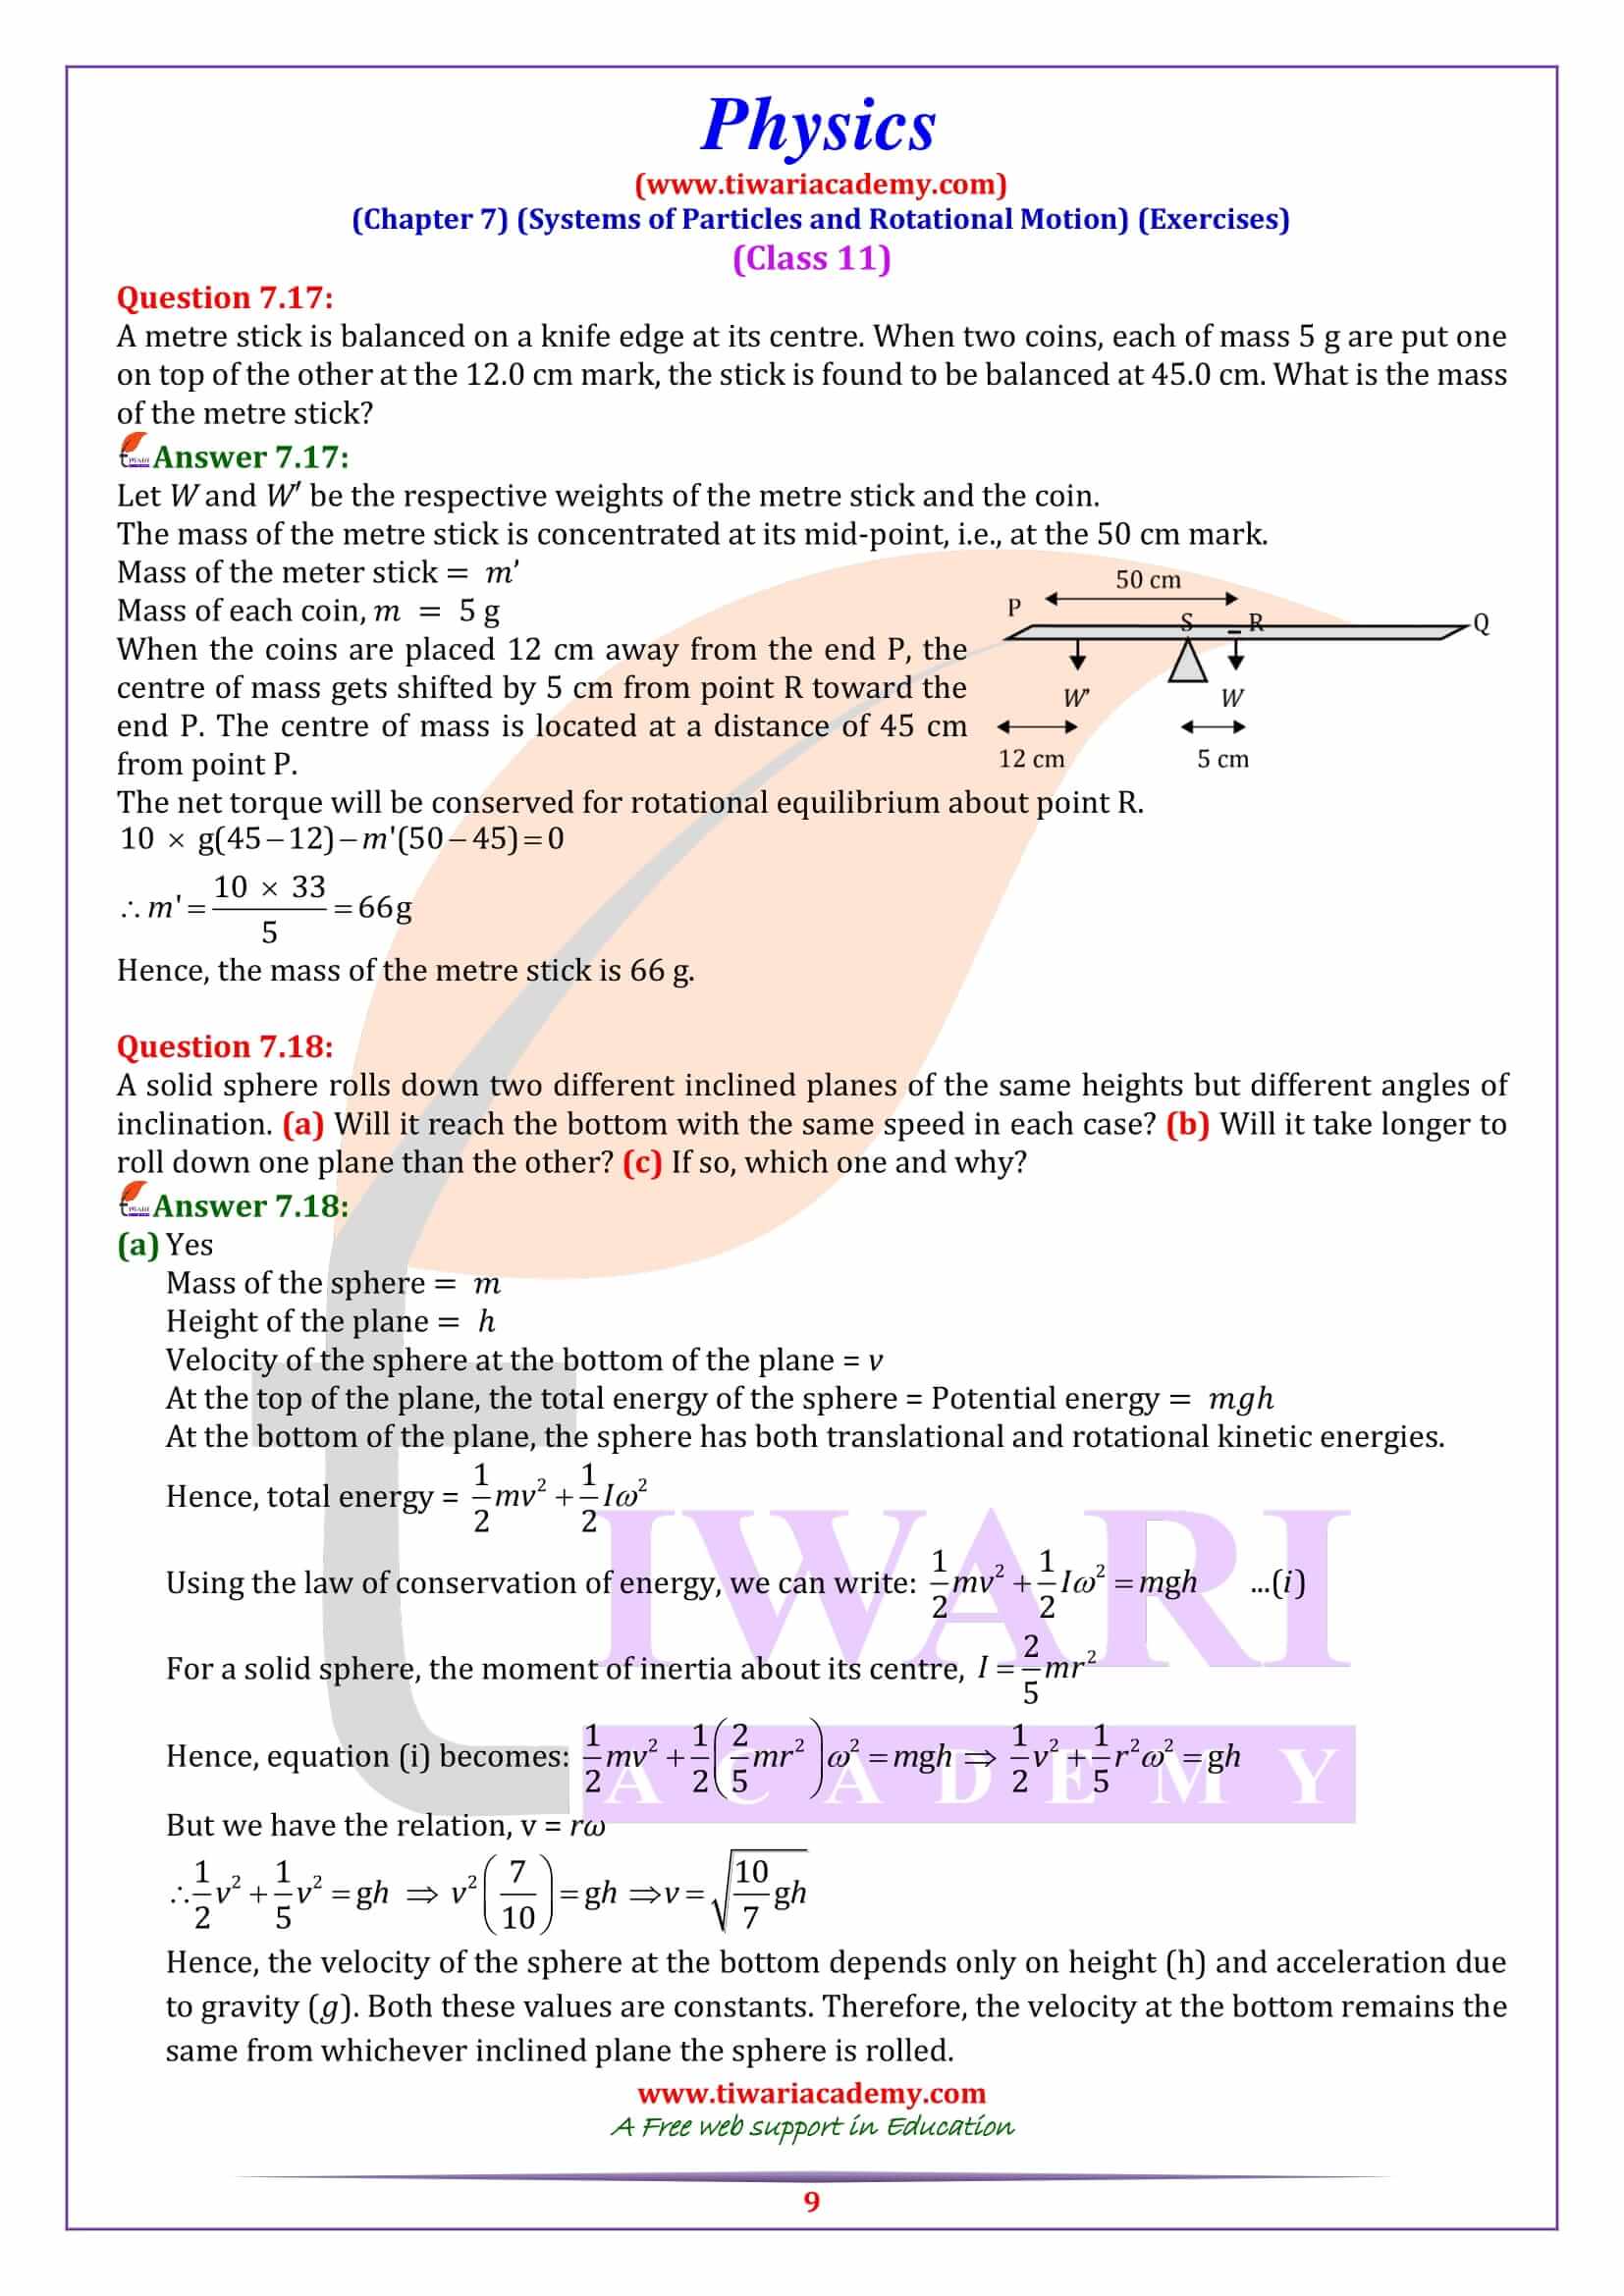 Class 11 Physics Chapter 7 Exercise answers